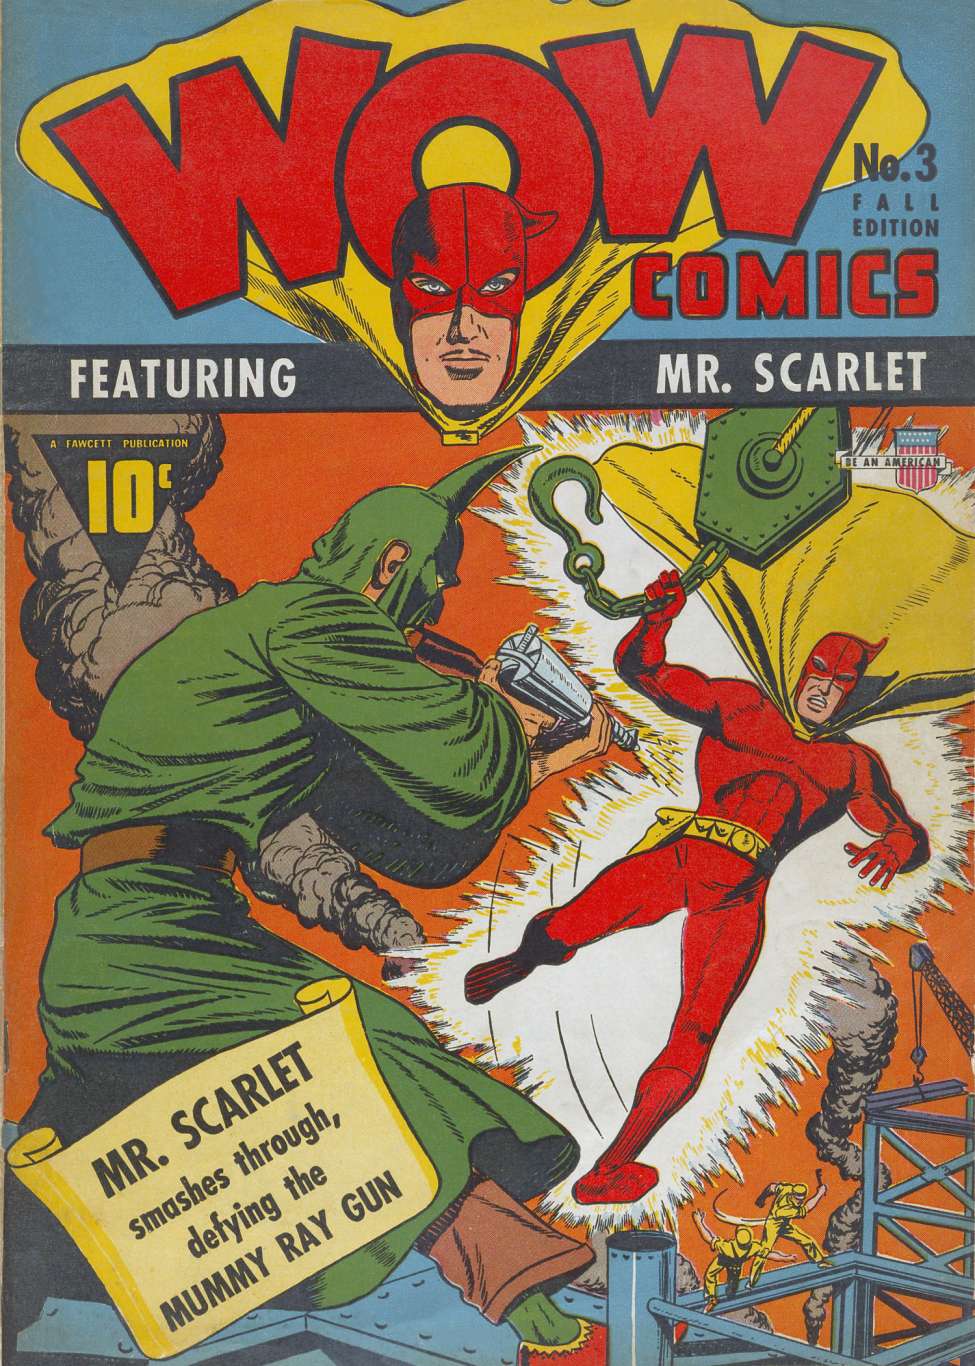 Book Cover For Wow Comics 3